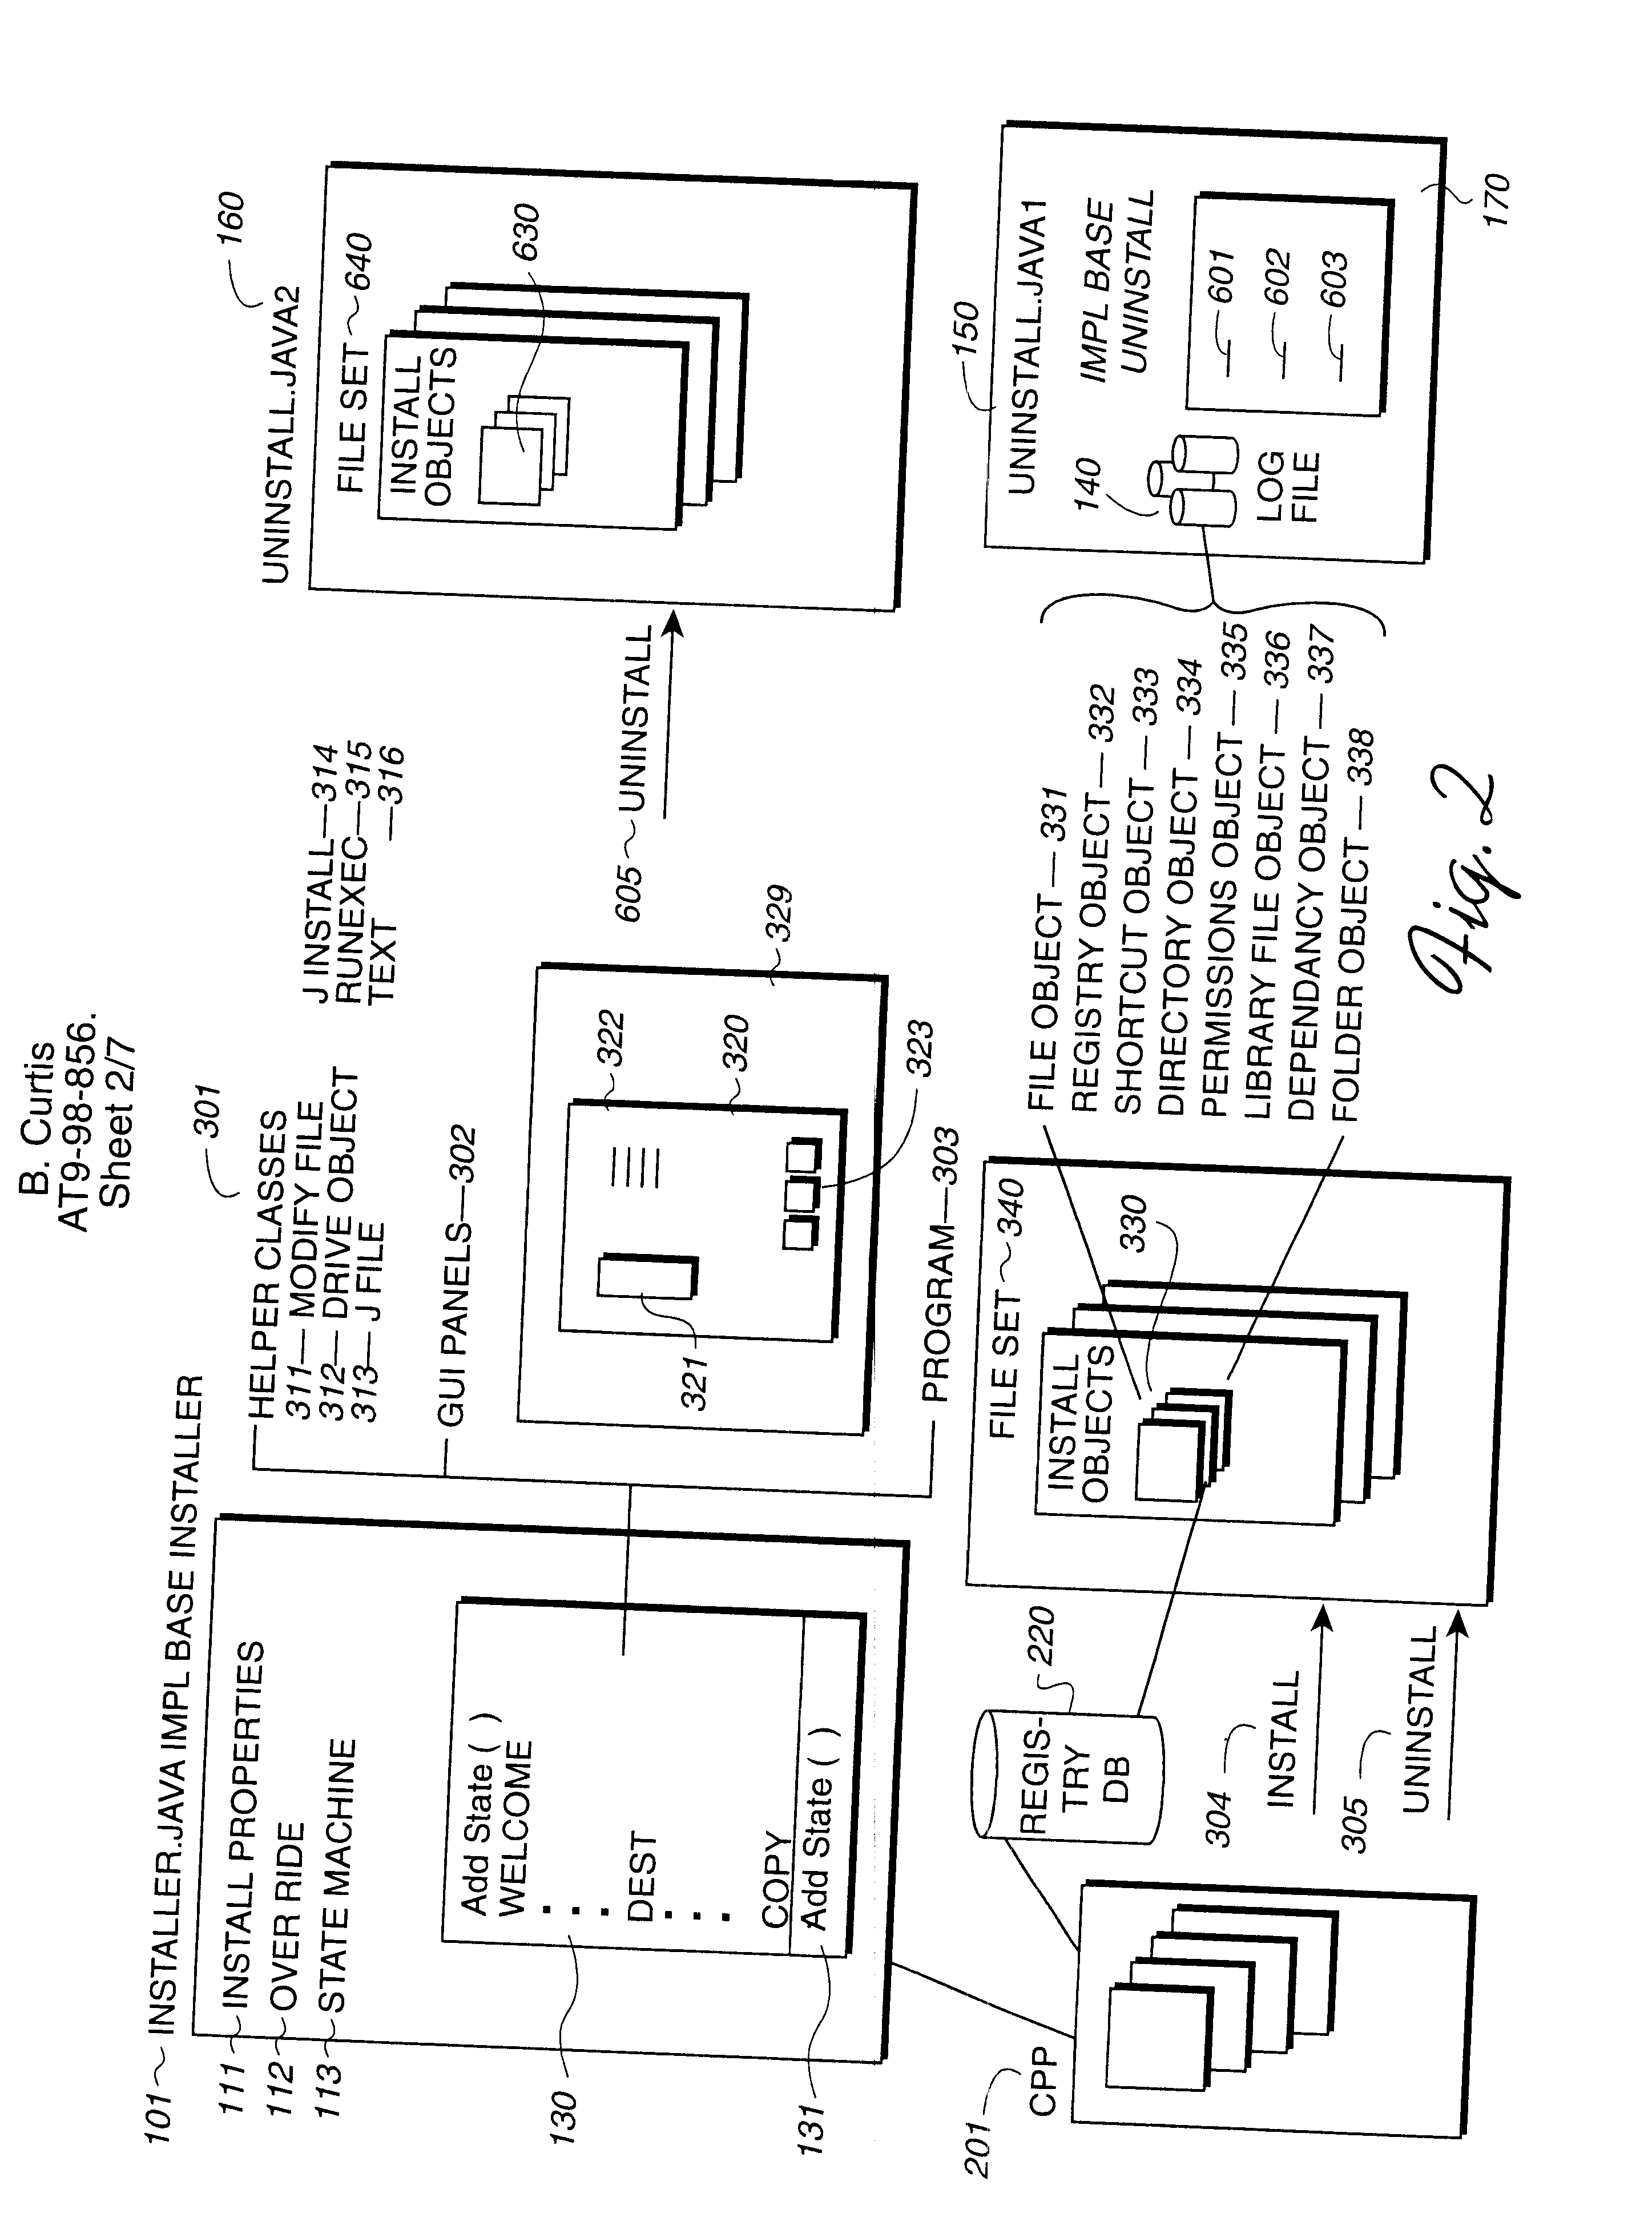 System, method, and program for checking dependencies of installed software components during installation or uninstallation of software